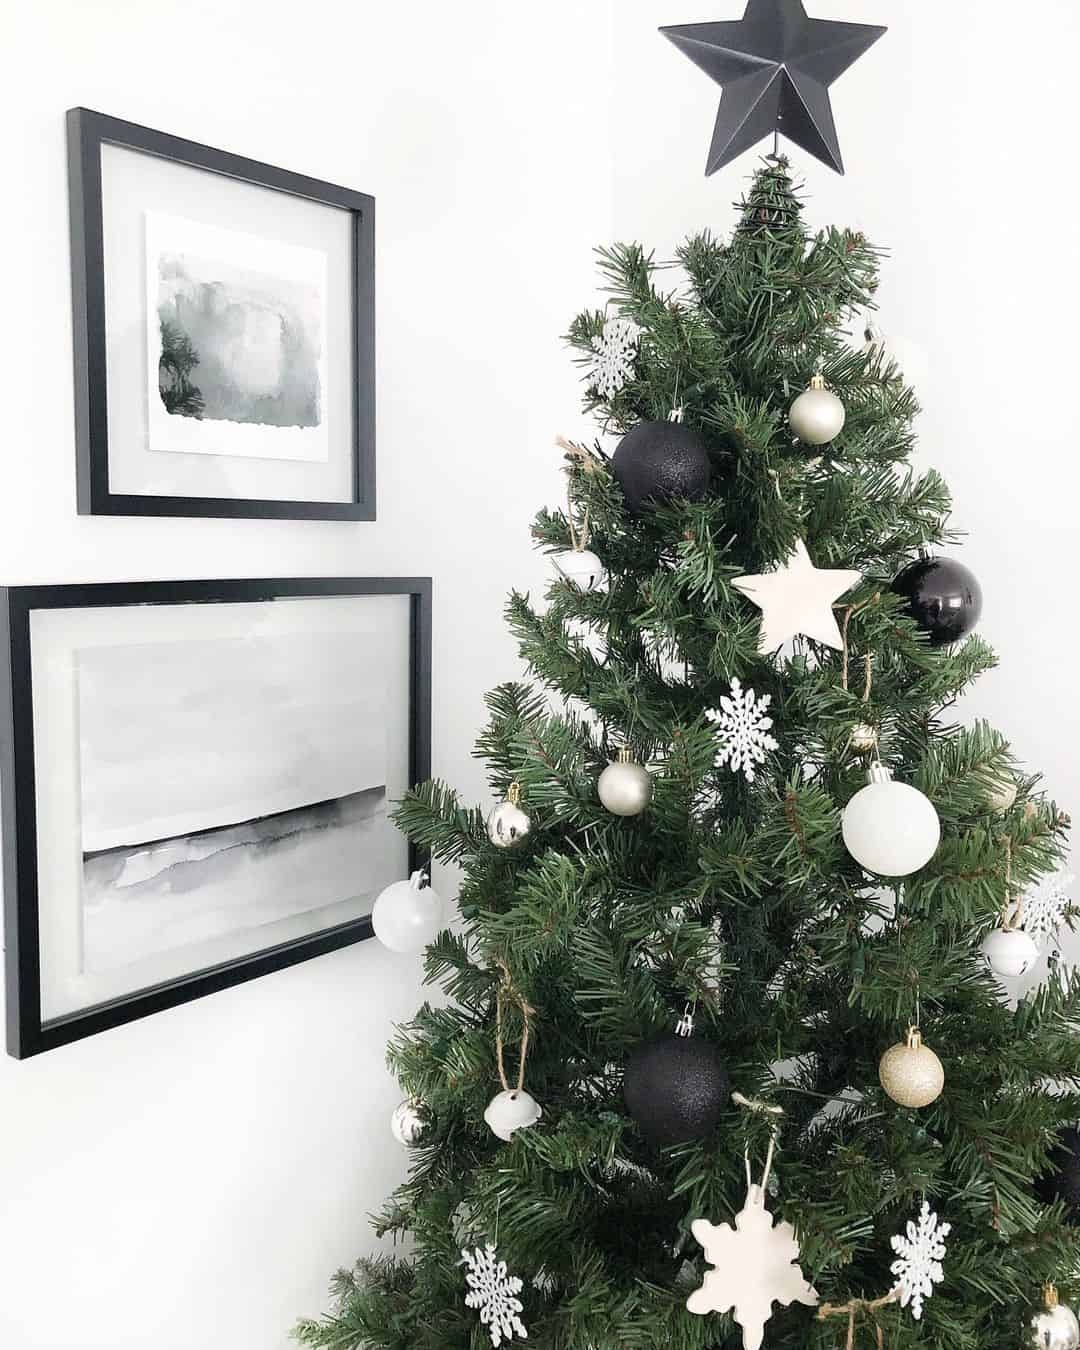 Top 70+ Black Christmas Tree Decorations Ideas that Light Up Your